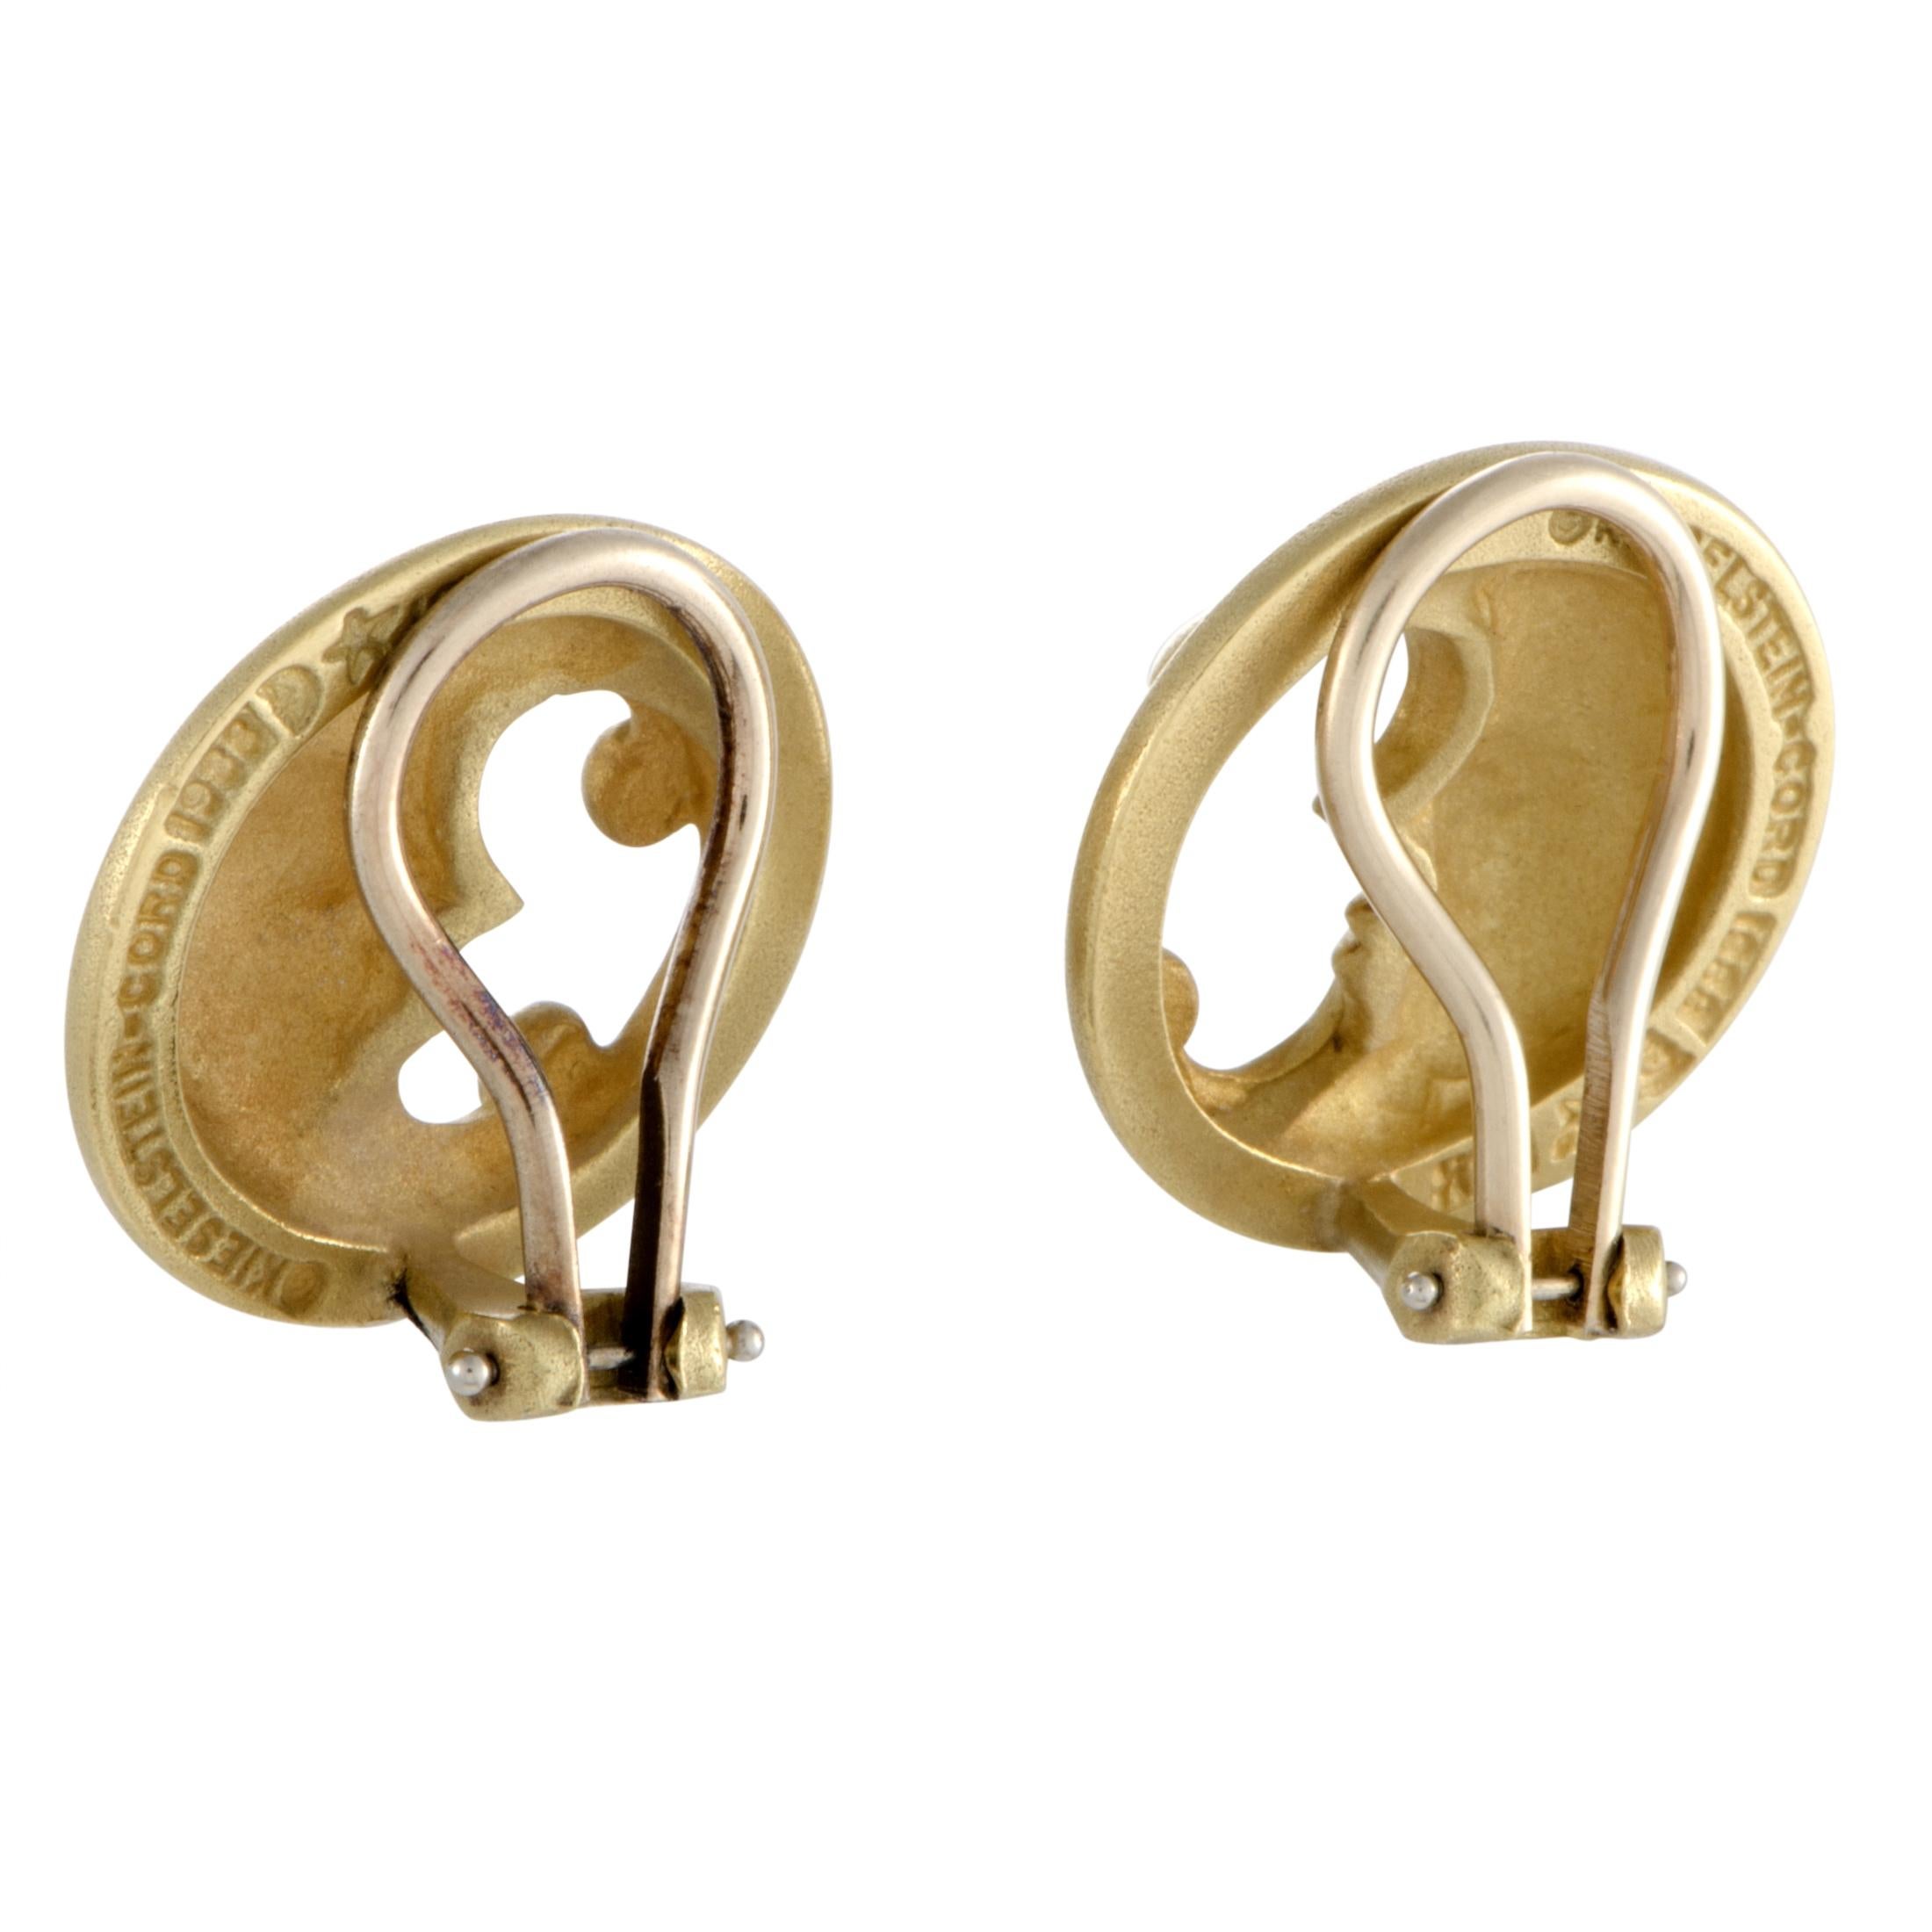 Depicting celestial crescent moons in an exceptionally artistic manner, these extraordinary earrings designed by Kieselstein-Cord offer an intriguingly fashionable look. The pair is beautifully crafted from radiant 18K yellow gold, with each of the